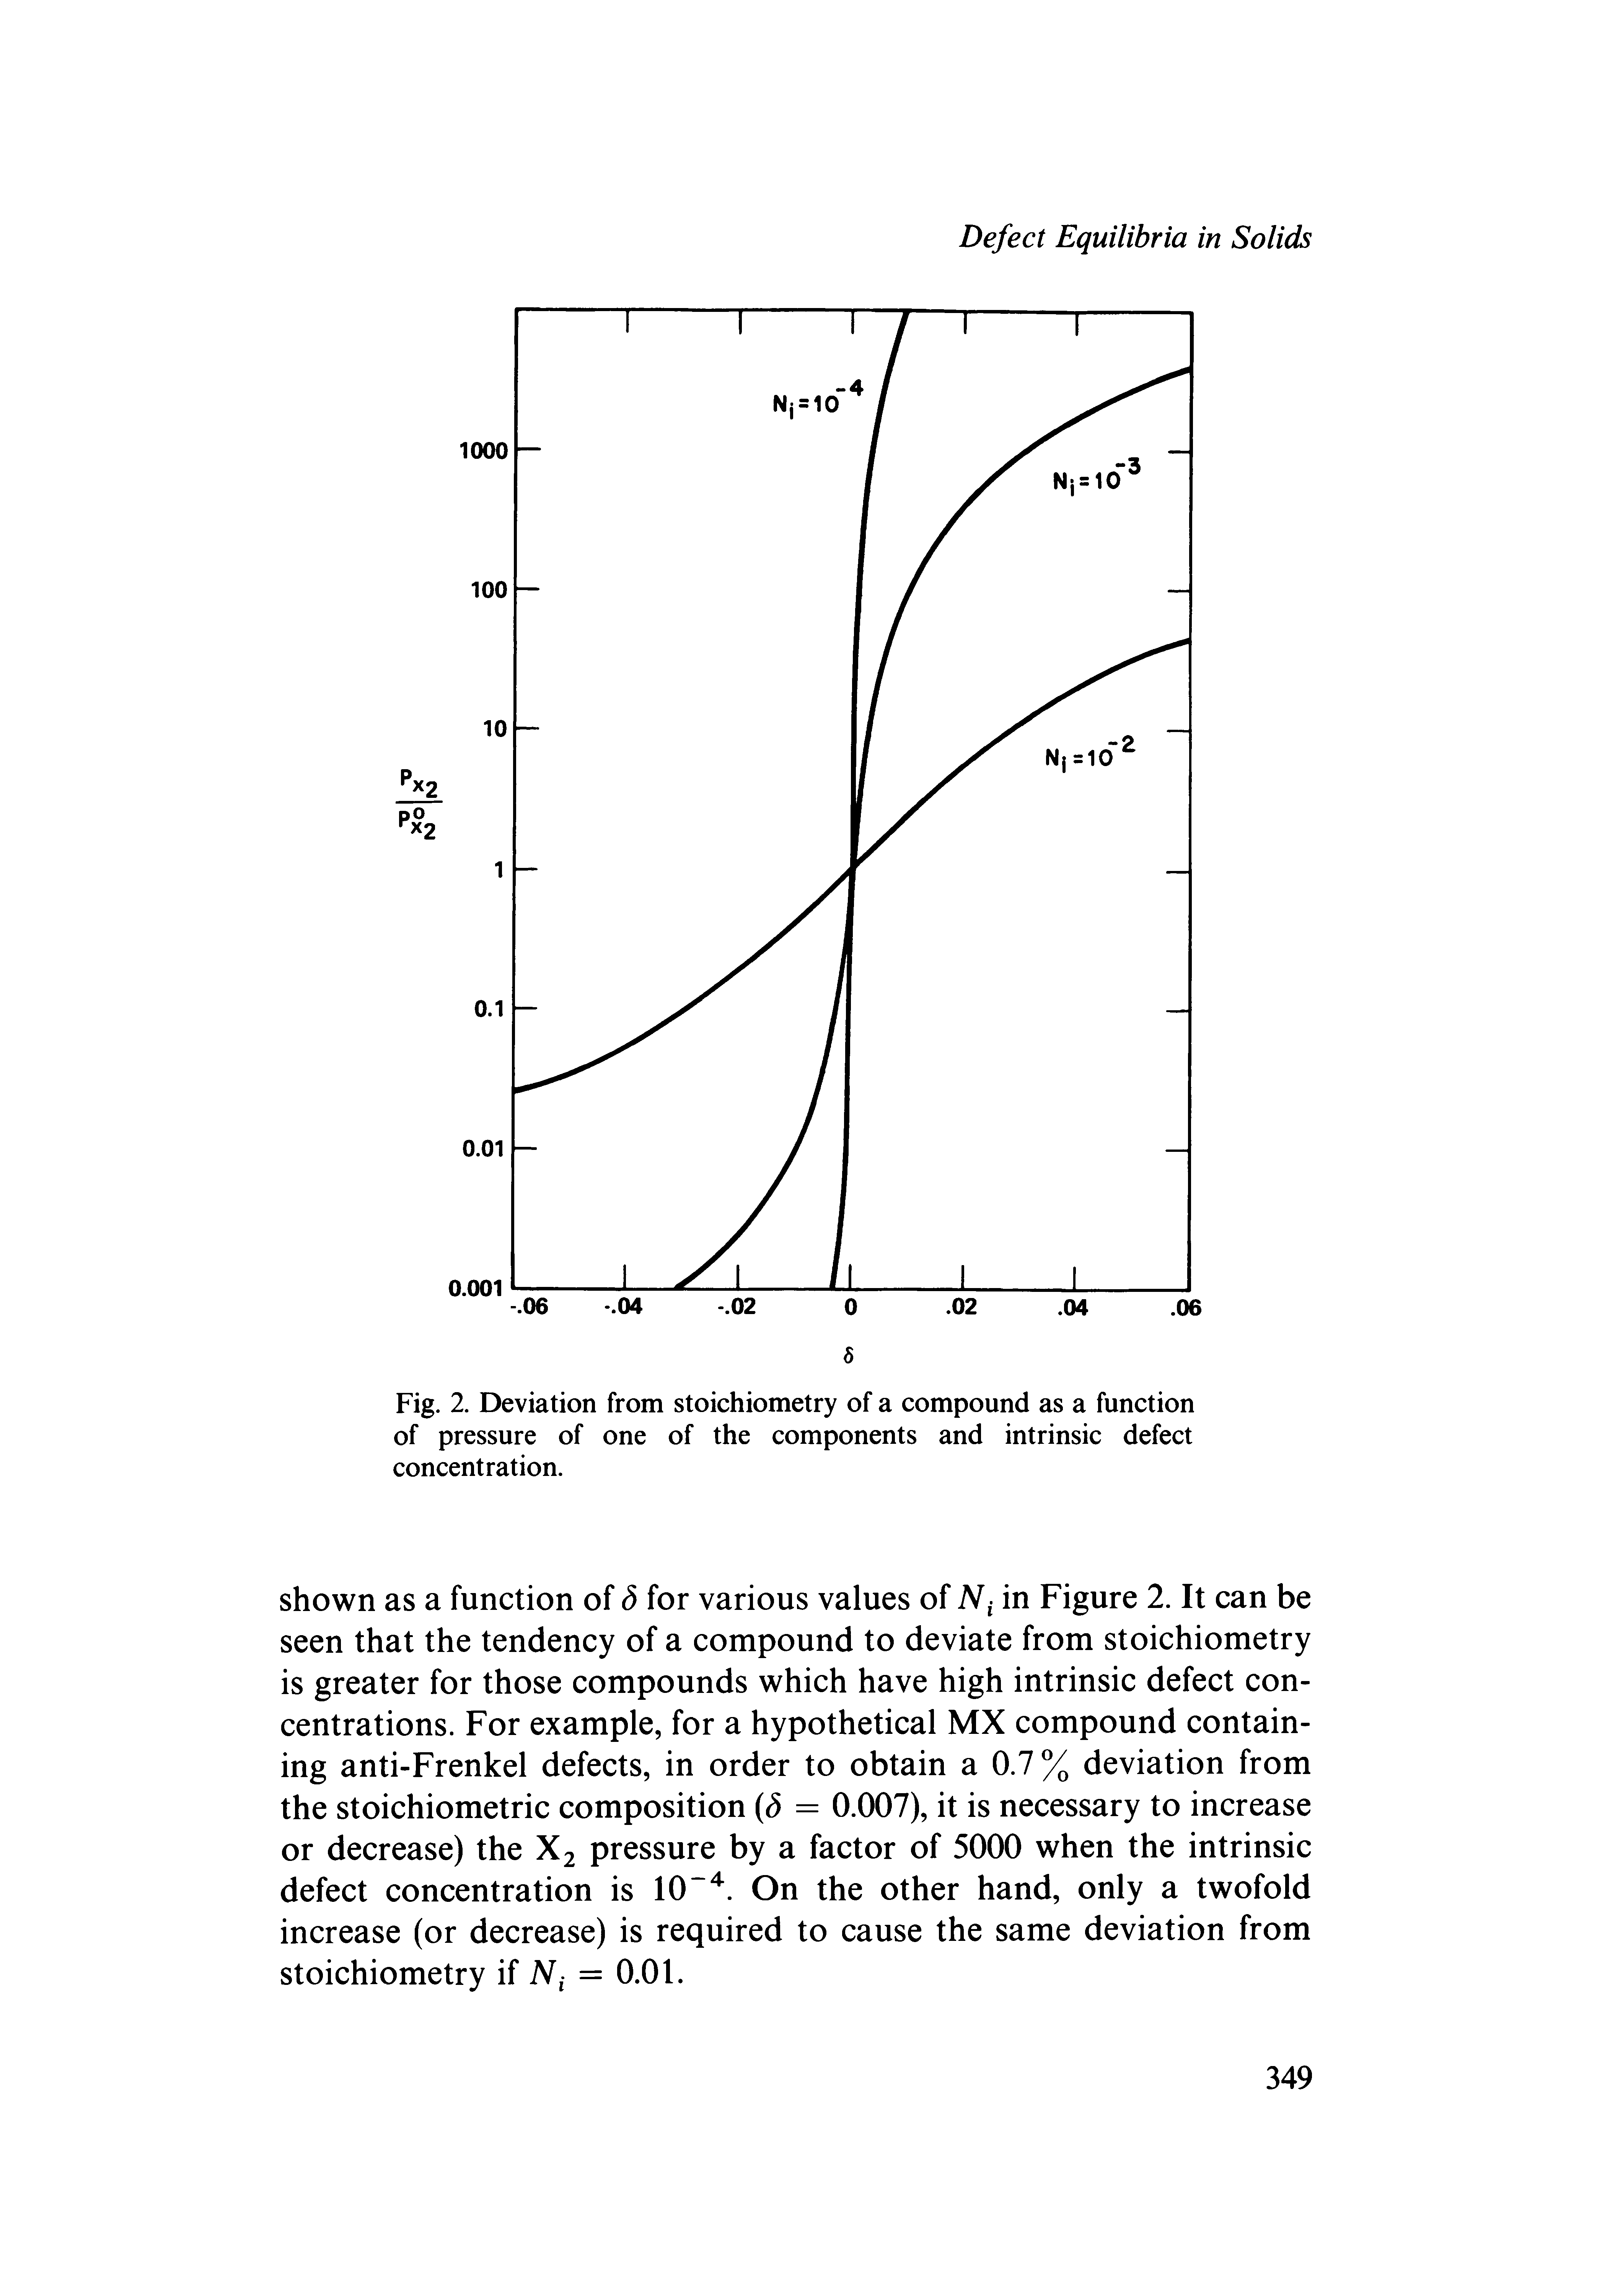 Fig. 2. Deviation from stoichiometry of a compound as a function of pressure of one of the components and intrinsic defect concentration.